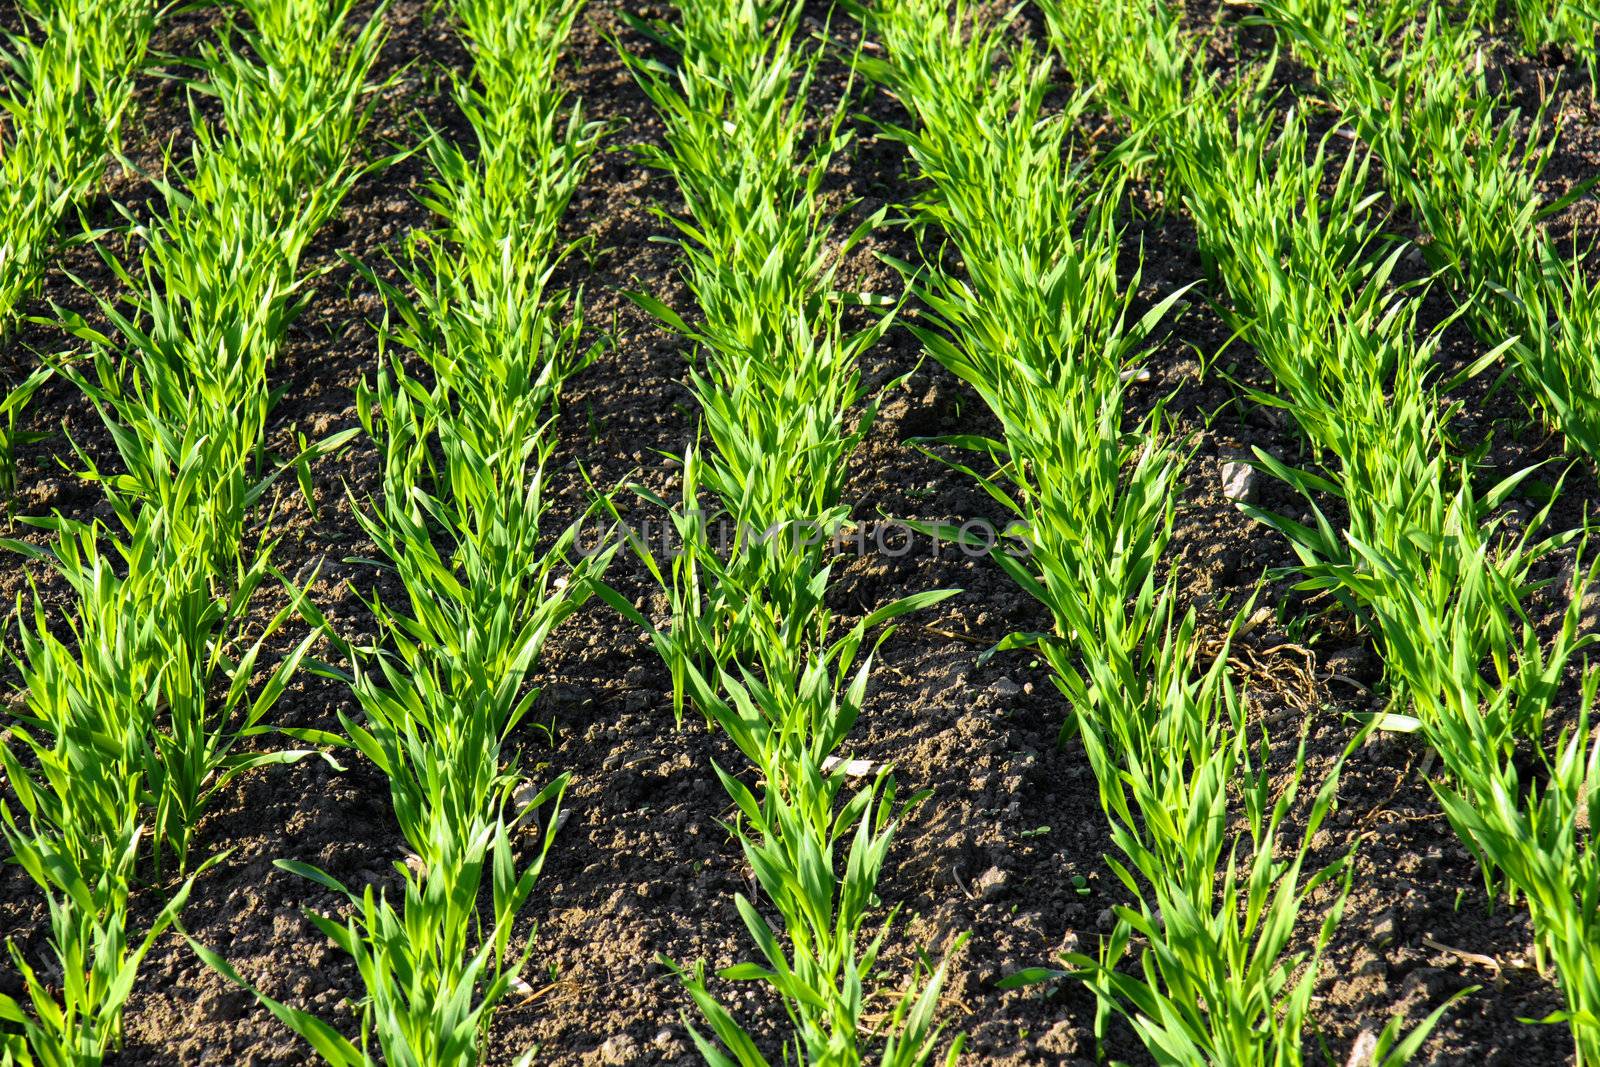 Vivid and bright green rows of growing cereals in an agricultural field